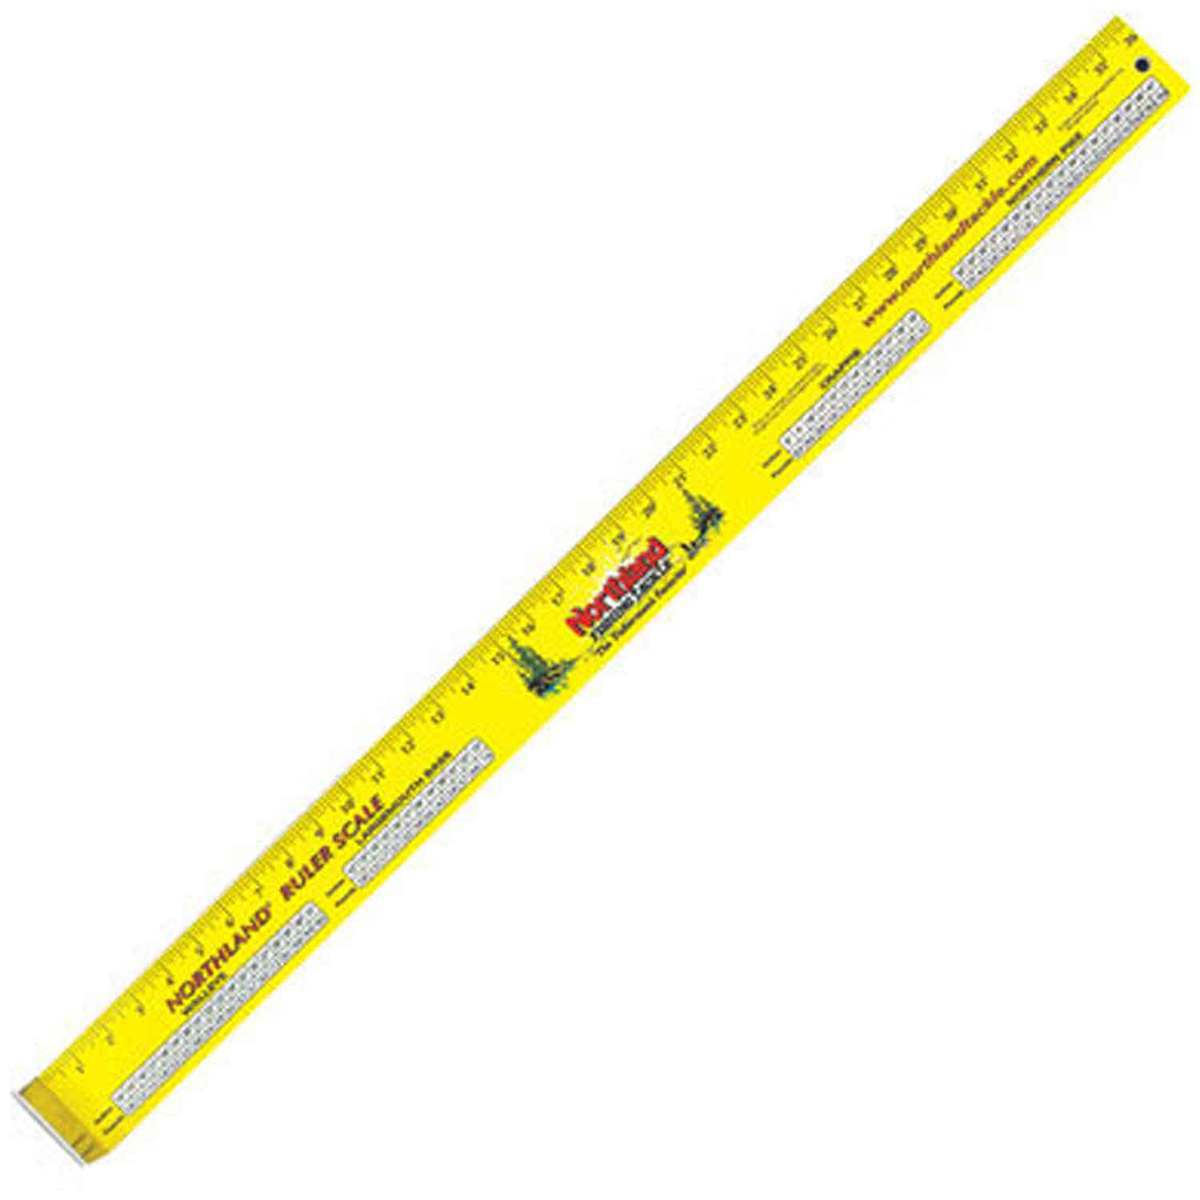 Keeper Tape fish measuring tape. Measures up to 36 inches. Package